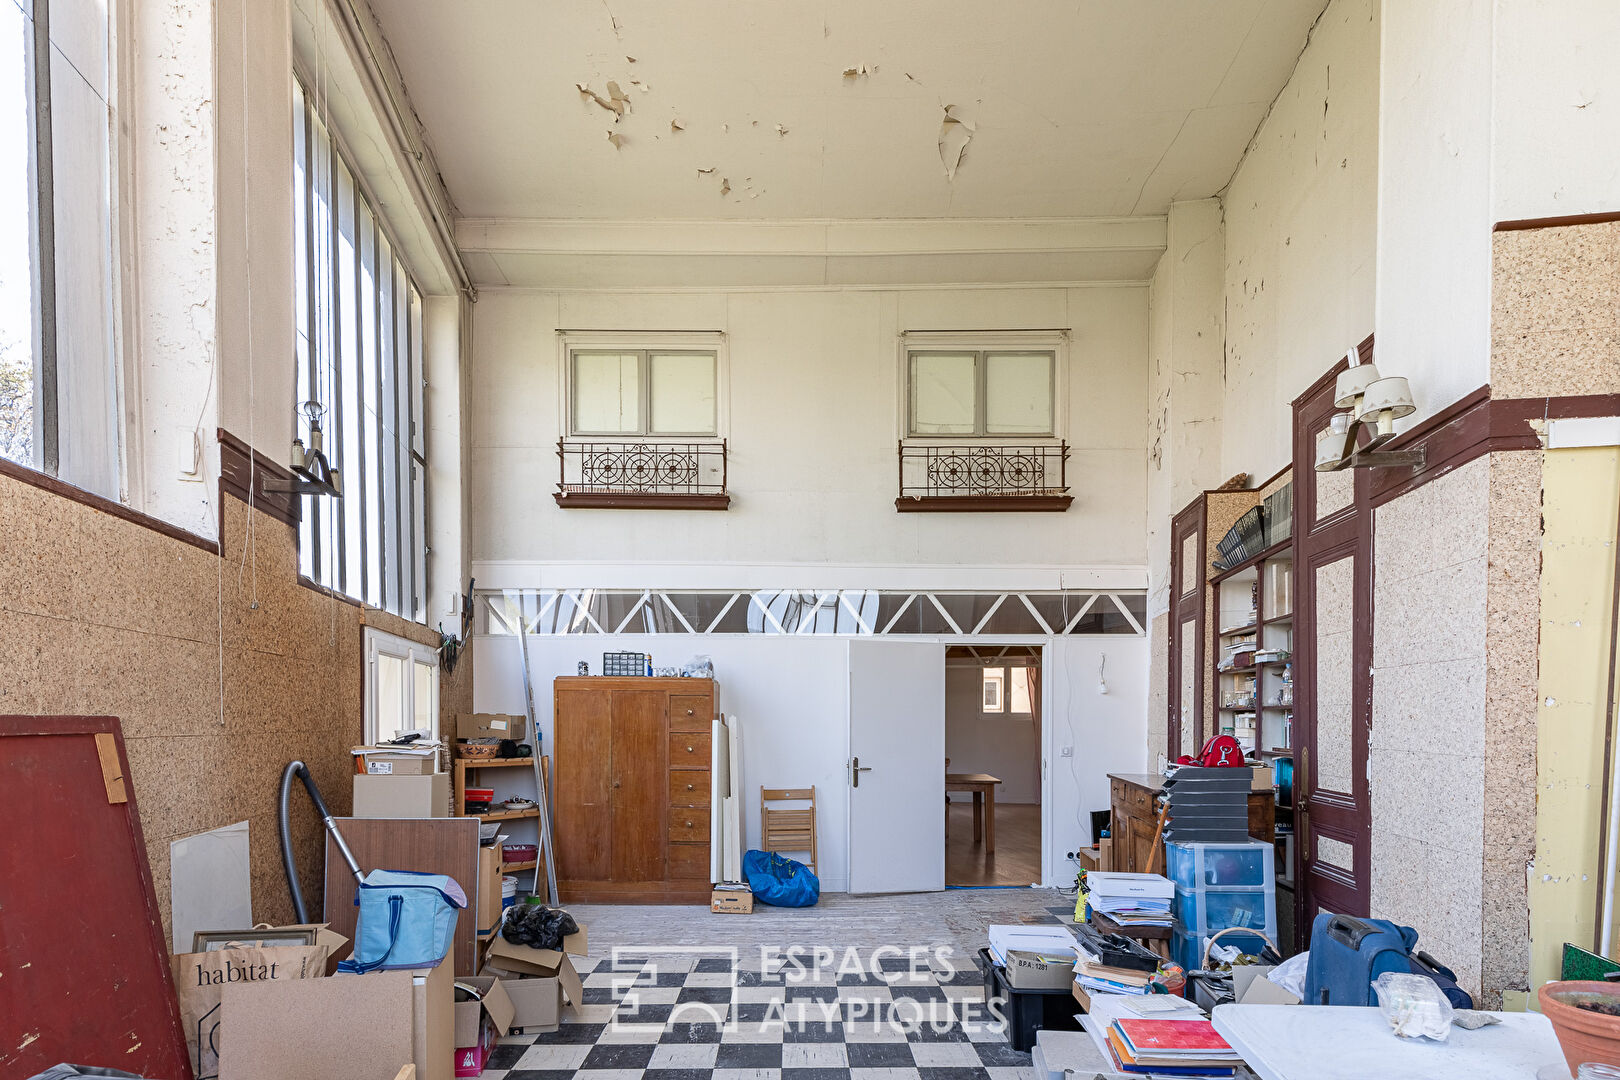 Former artist’s studio to be renovated